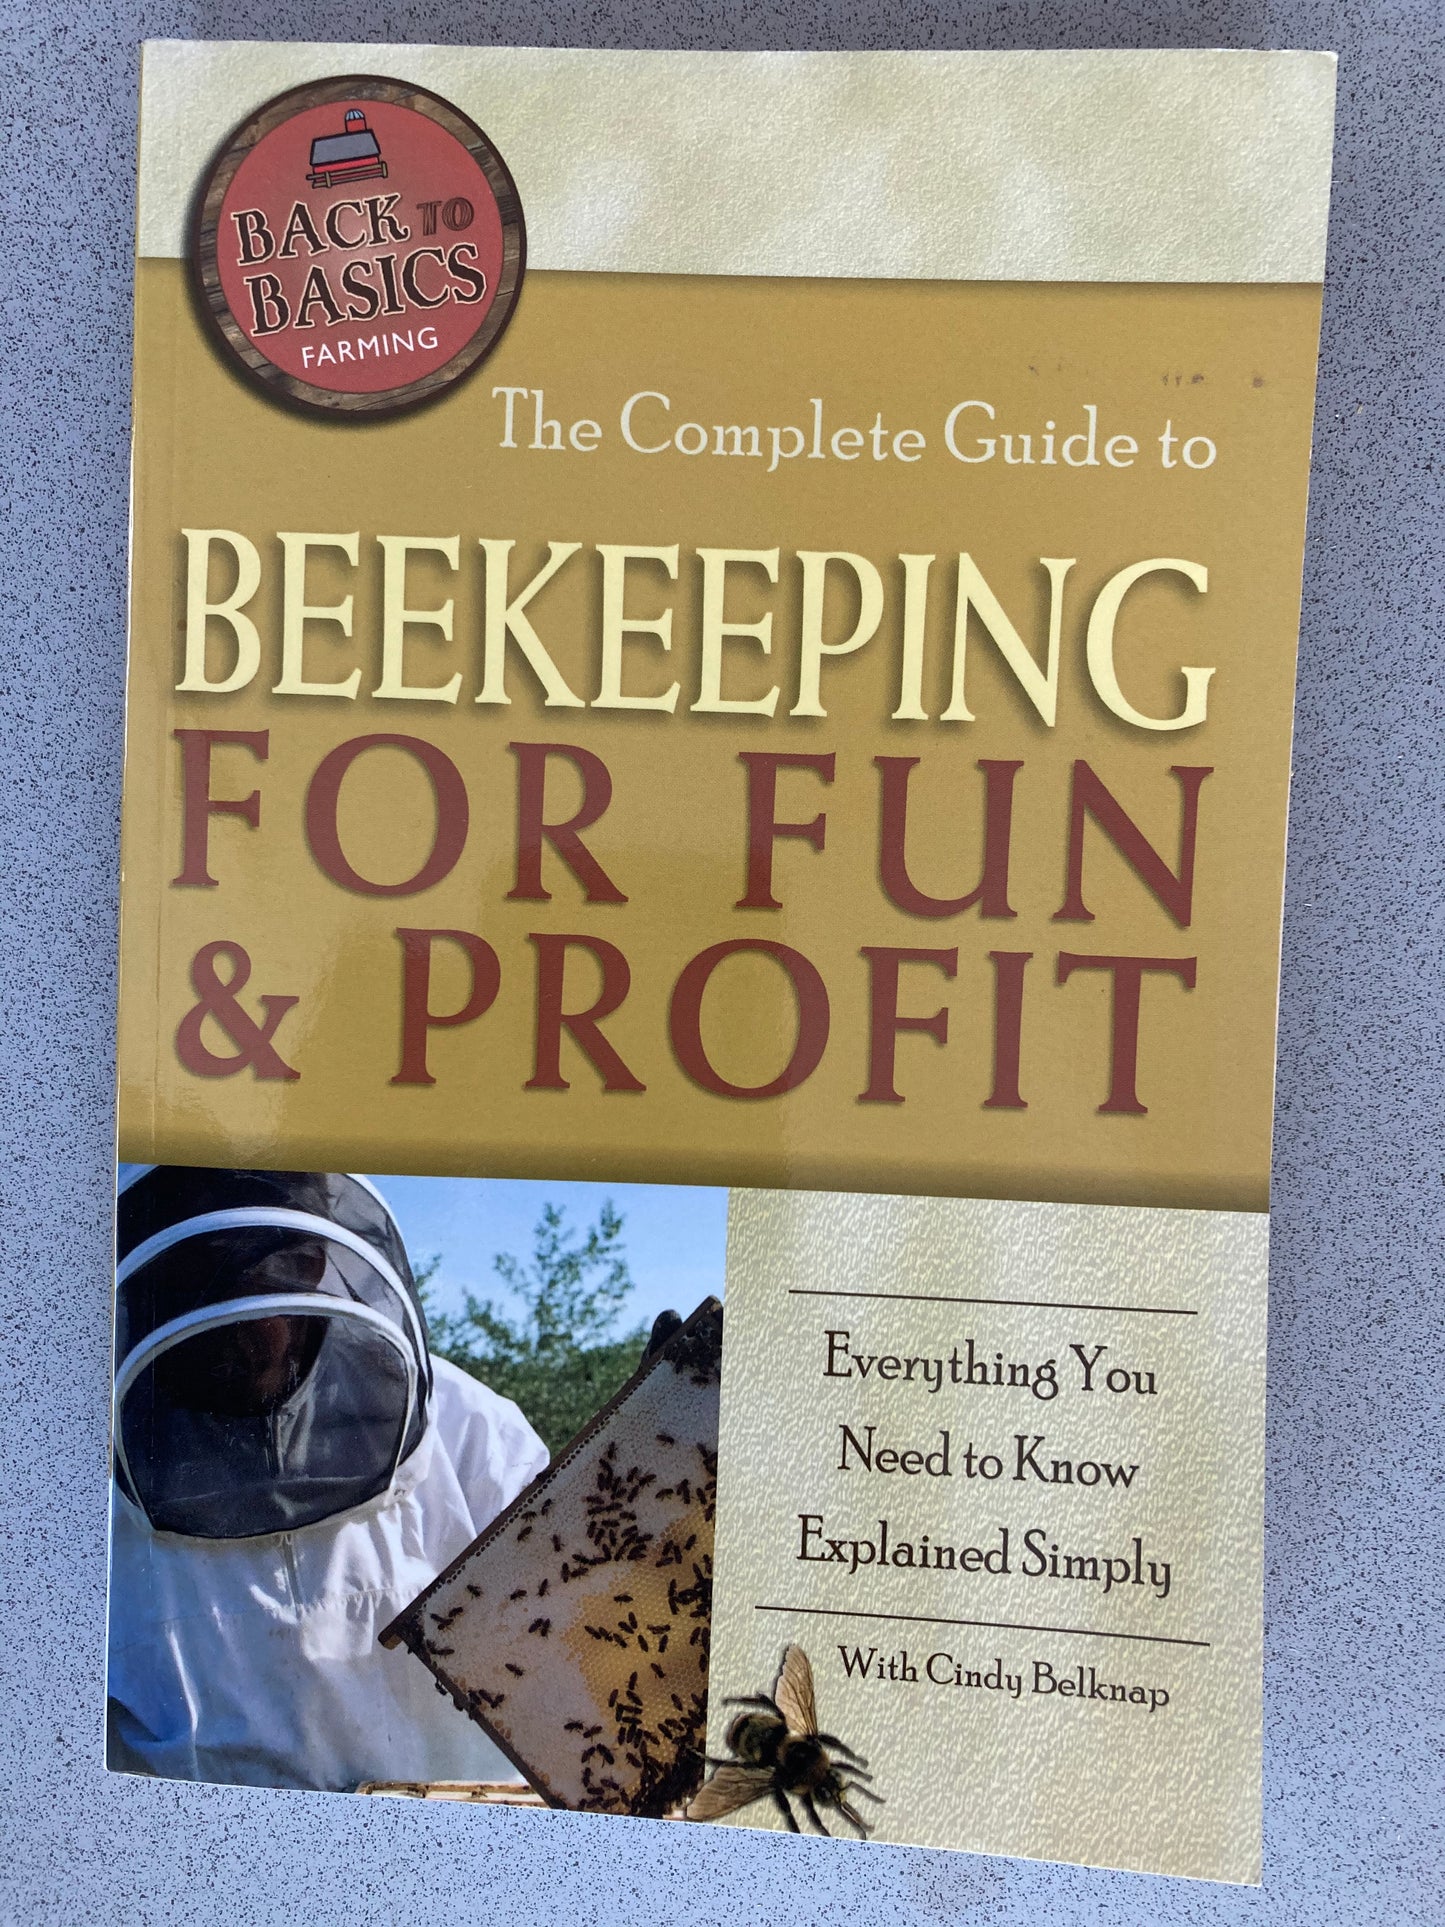 The Complete Guide to Beekeeping for Fun and Profit